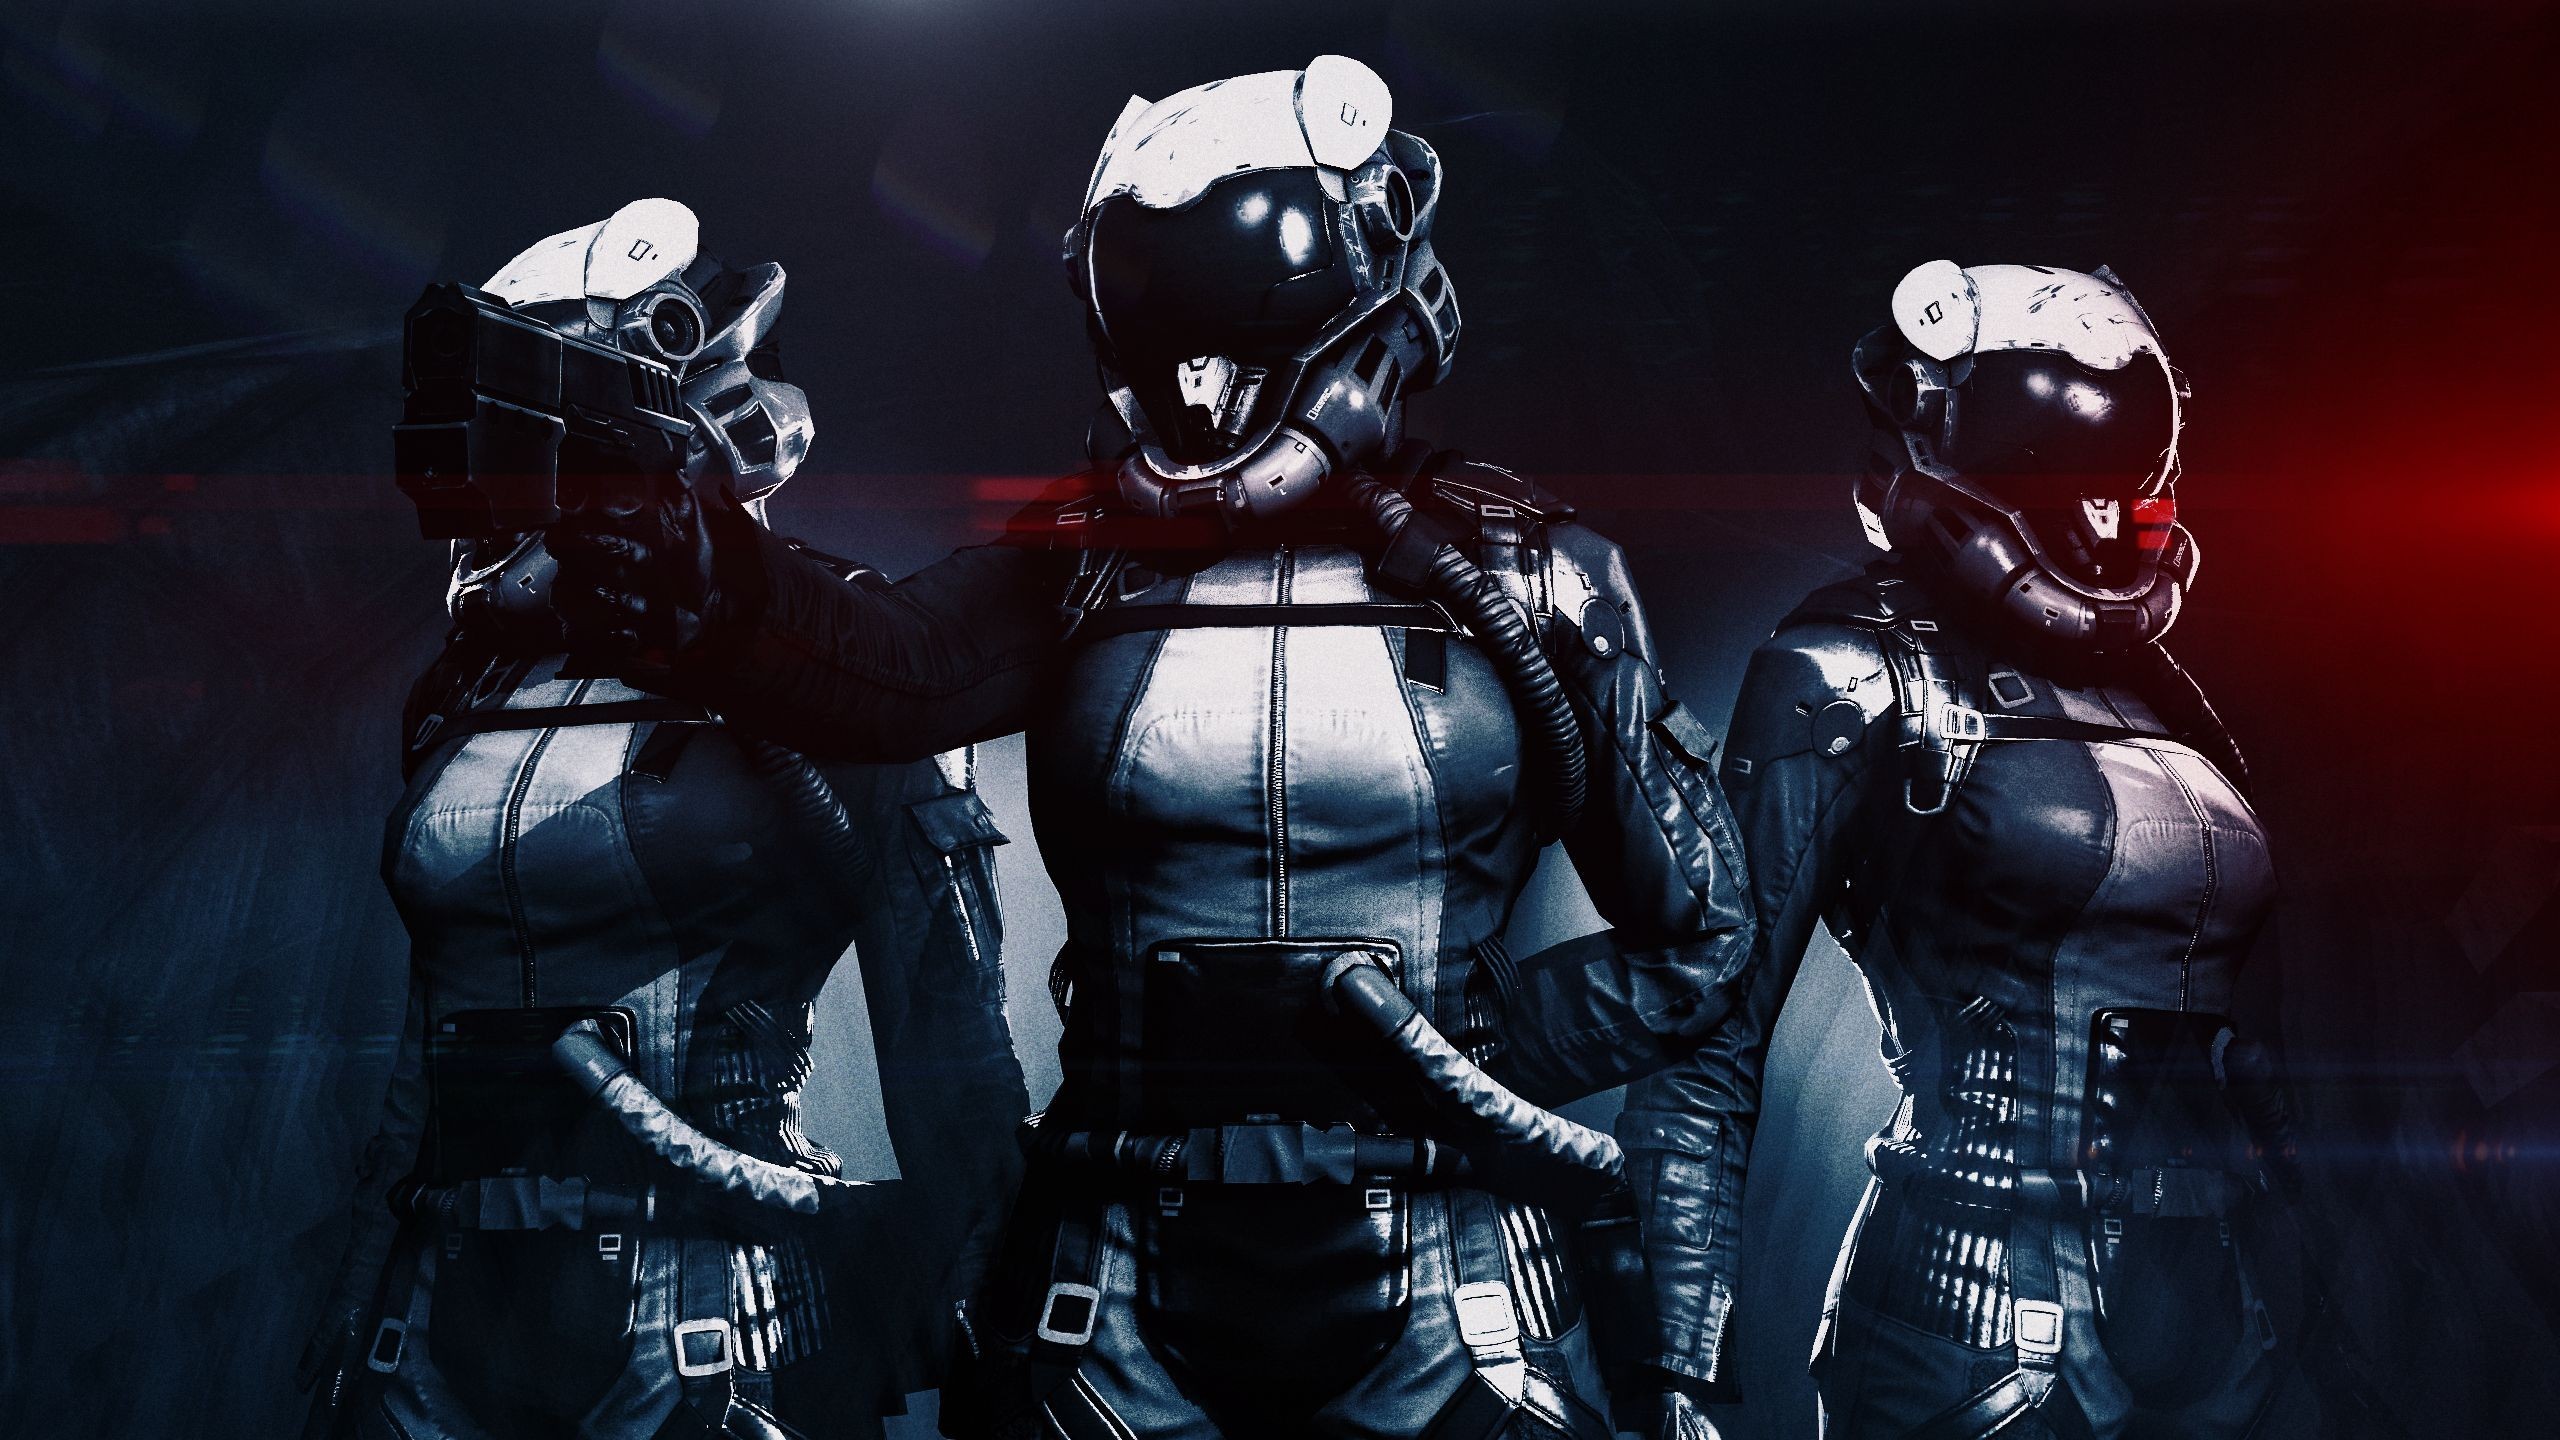 2560x1440 25 Blacklight: Retribution HD Wallpapers | Backgrounds - Wallpaper Abyss